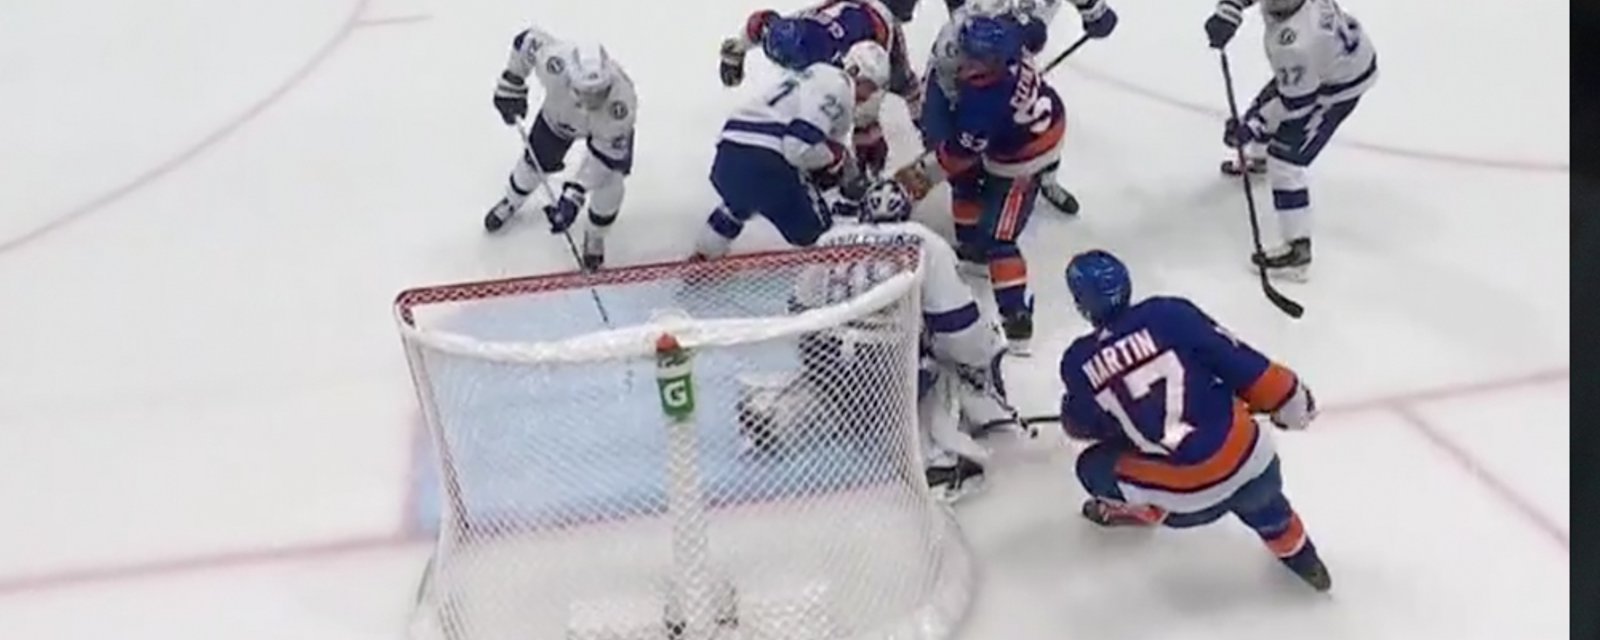 Cernak scores on his own net to tie the game for the Islanders